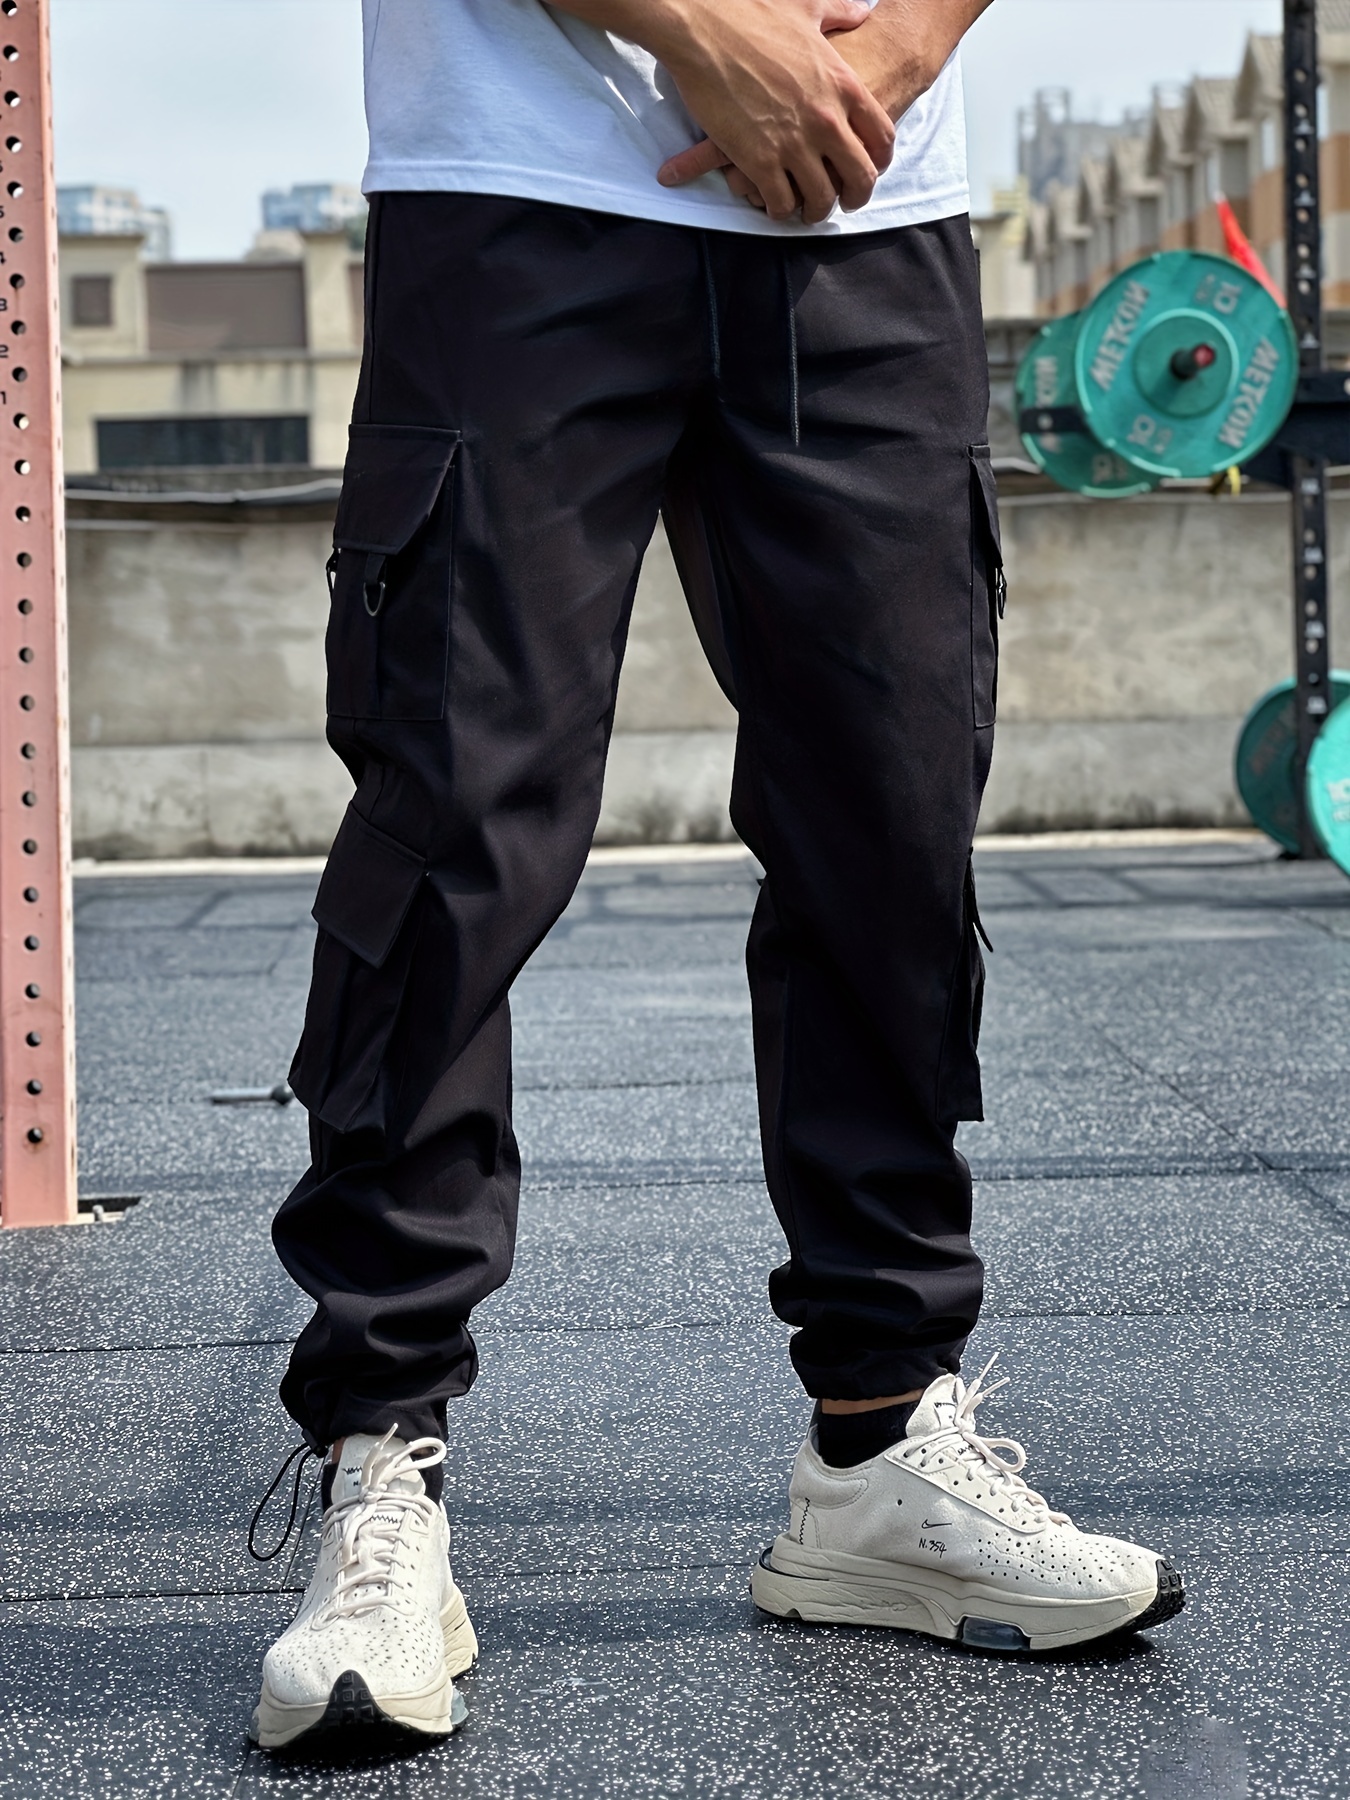 Relaxed Fit Cargo Pants - Gray - Men